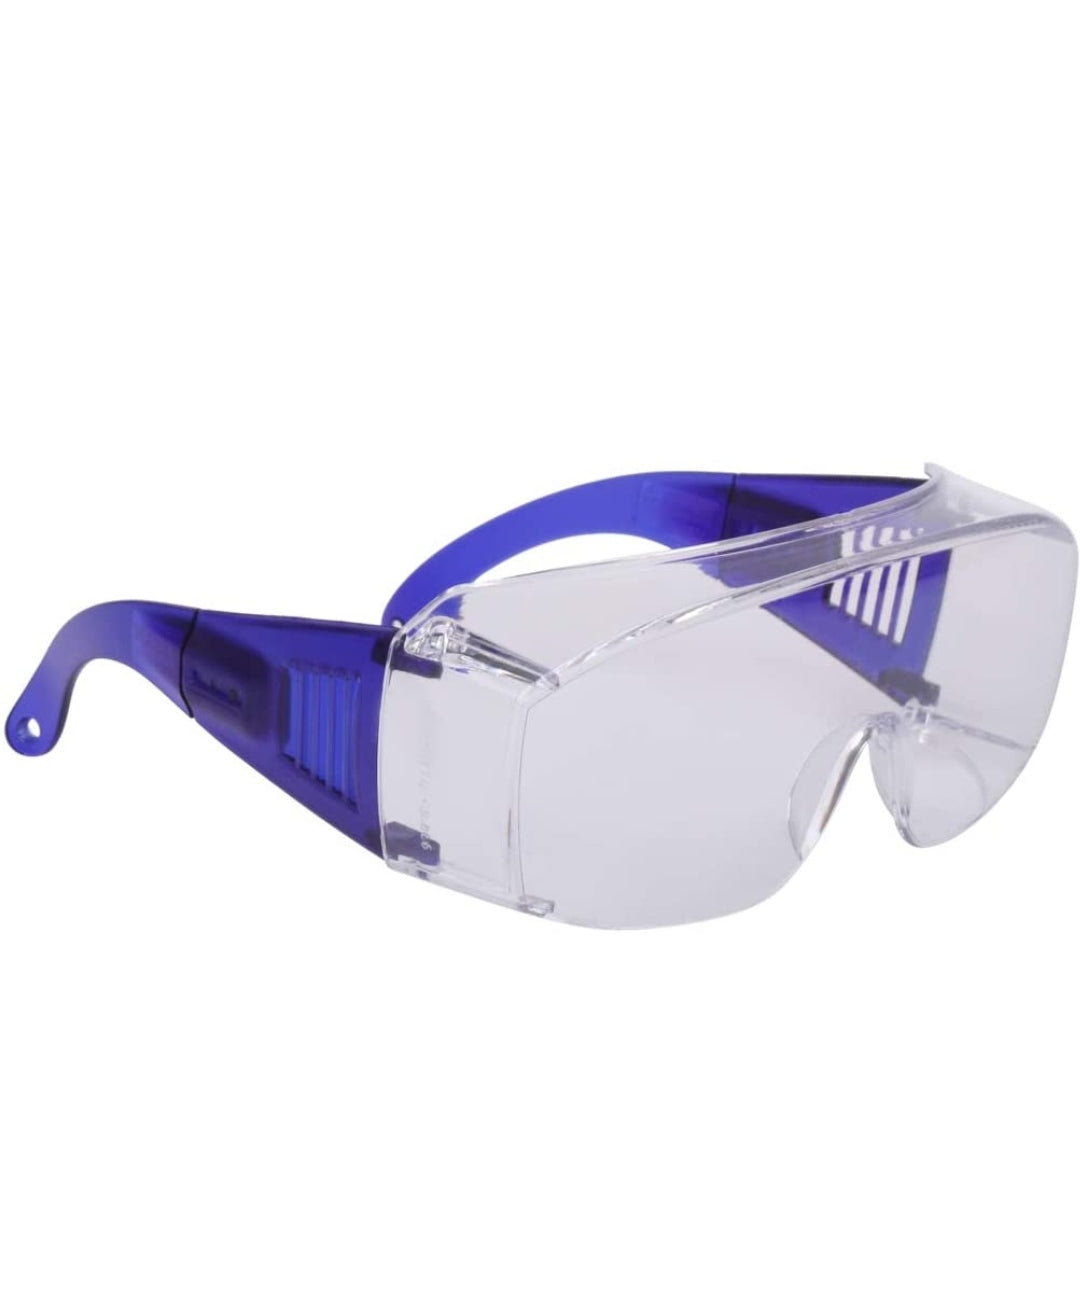 Karam Safety Overspectacle Clear Coated Lens